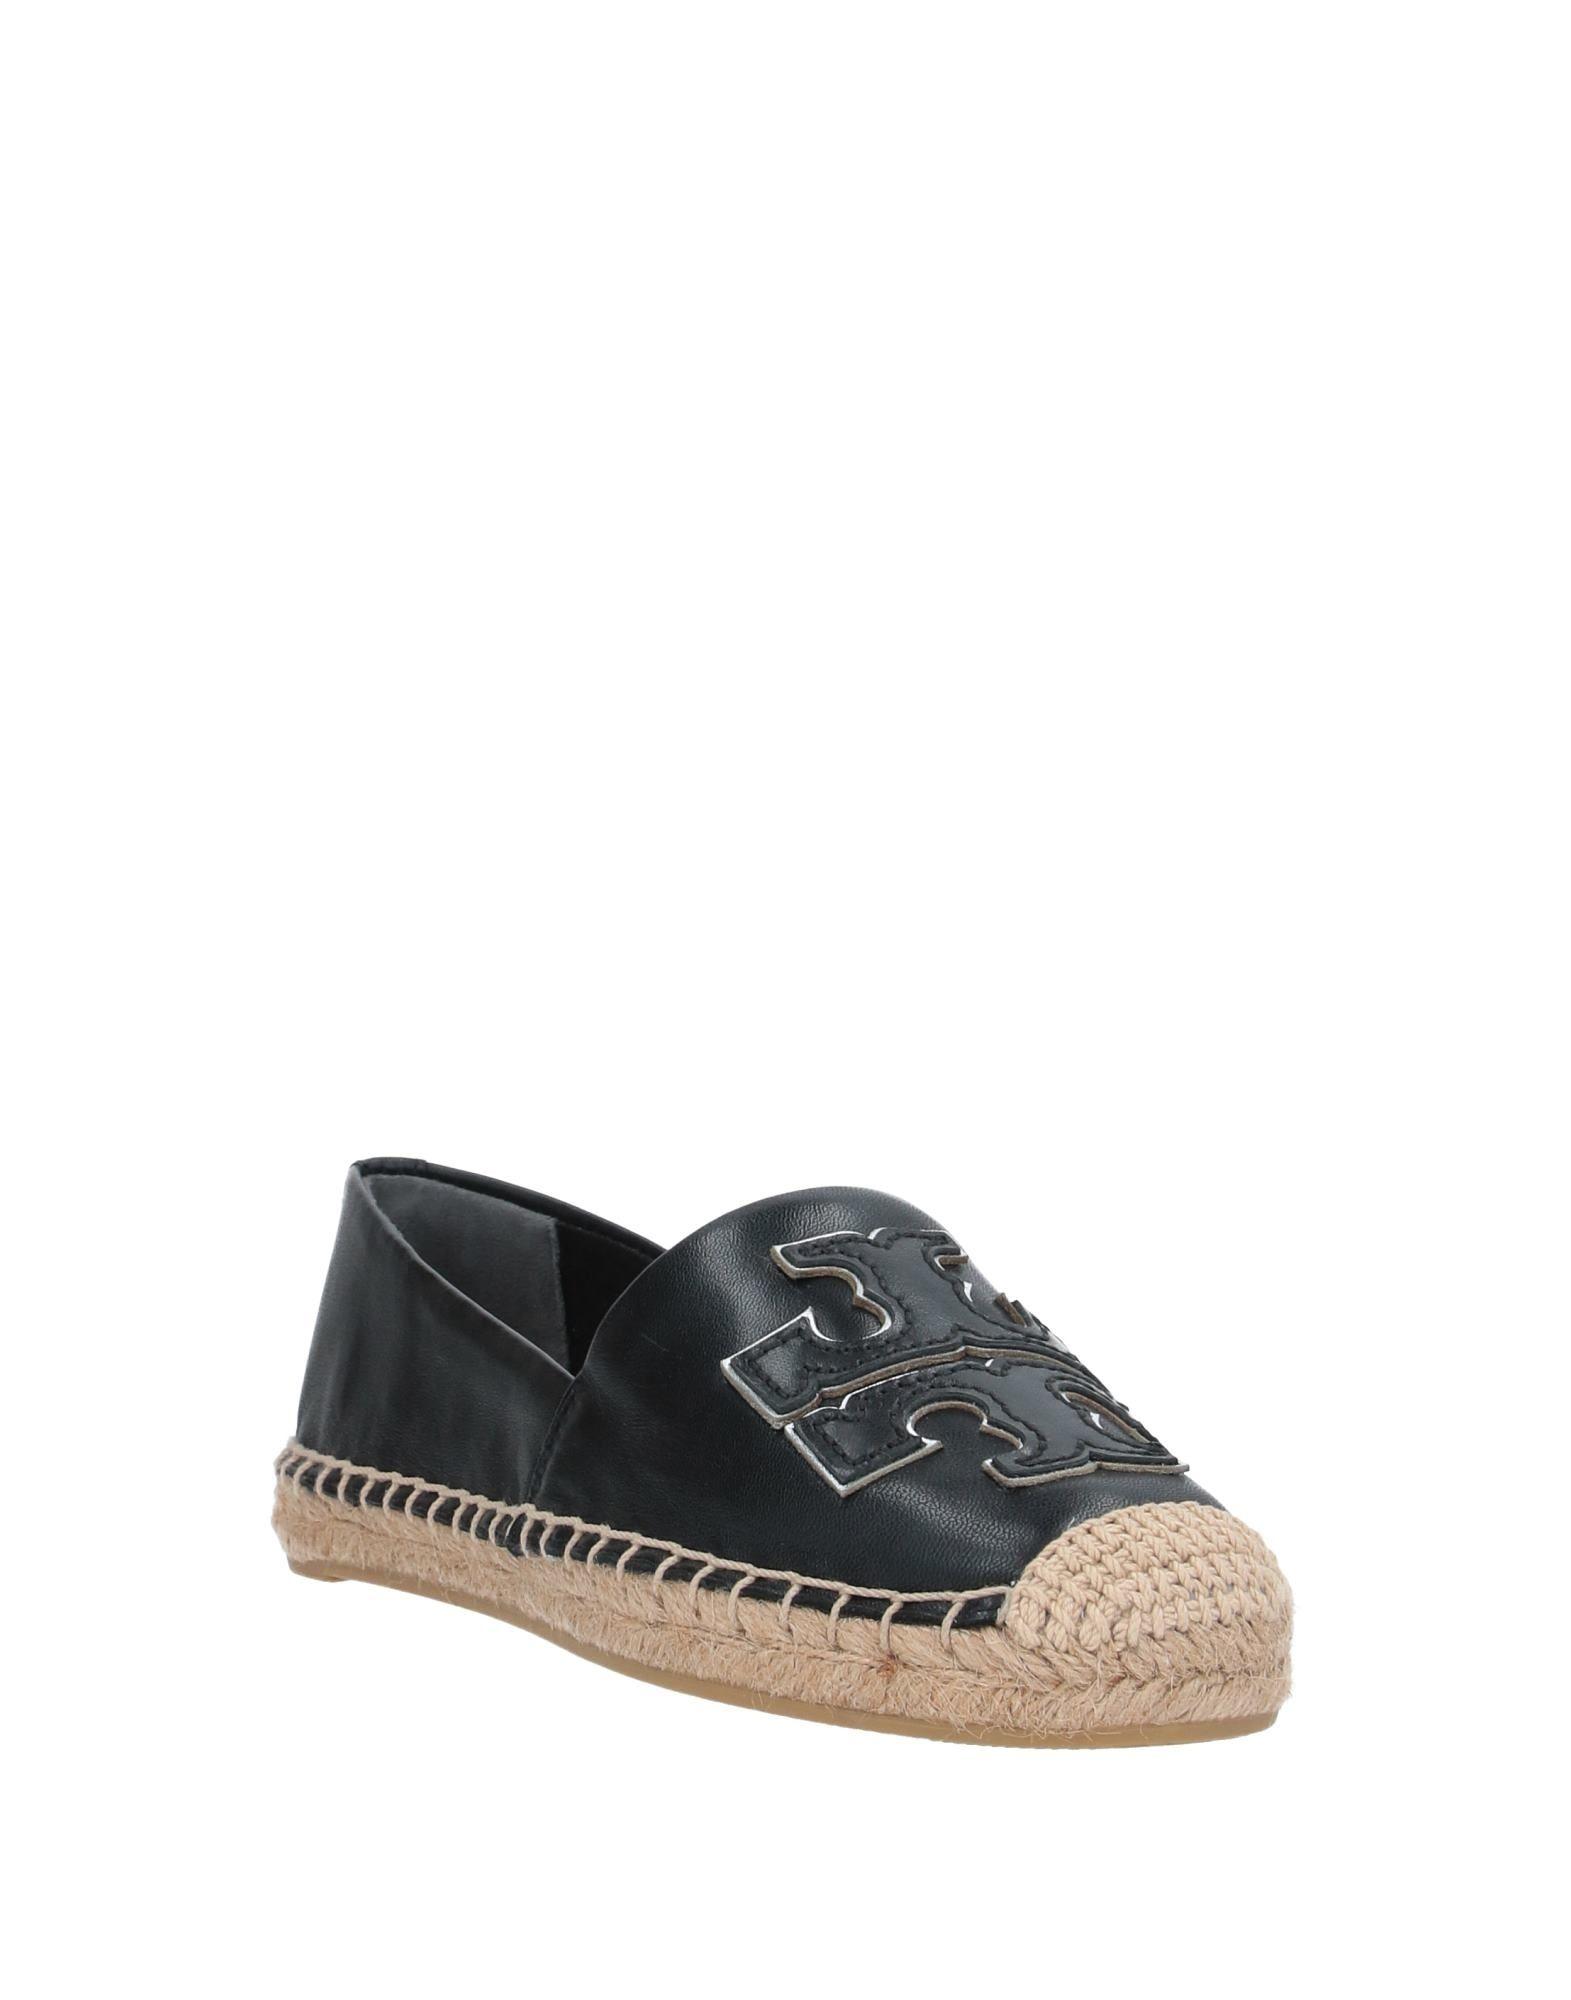 Tory Burch Leather Espadrilles Ines in Black Leather (Black) - Save 80% ...